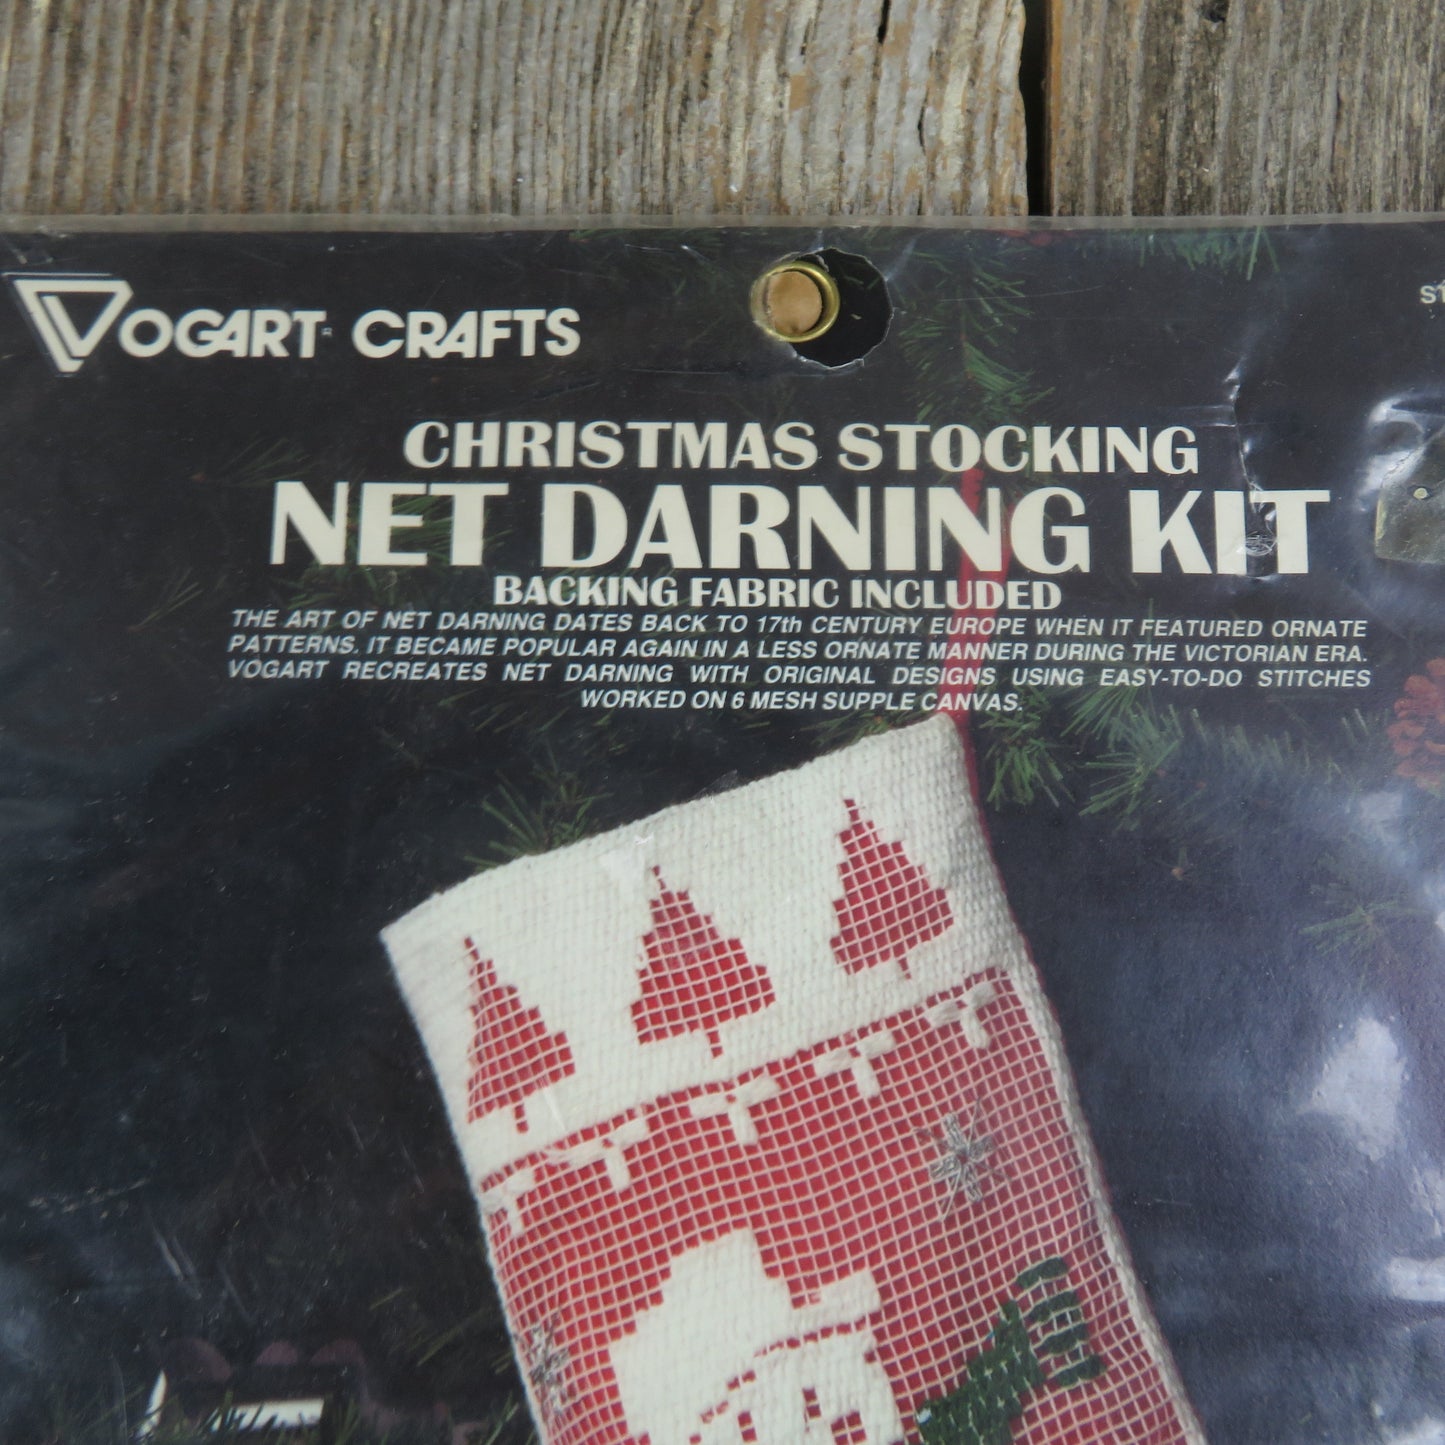 Snowman Christmas Stocking Lace Net Darning Kit Vogart Crafts 2946 Filet Lace Embroidery Craft Kit White Red